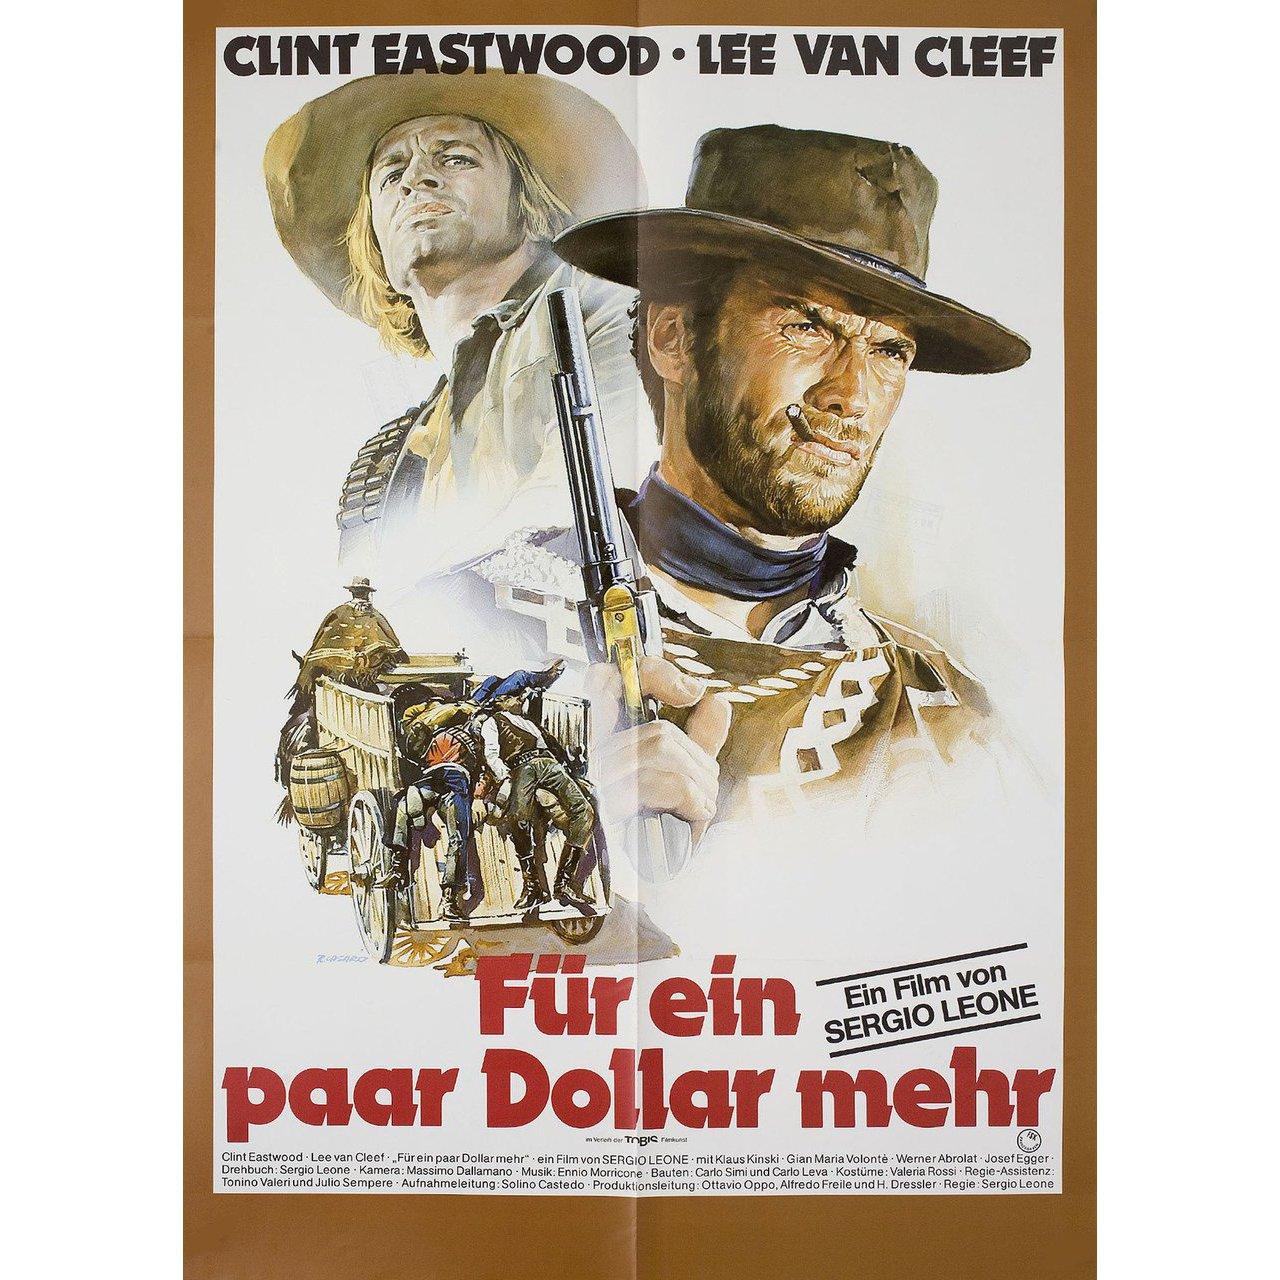 Original 1978 re-release German A1 poster by Renato Casaro for the 1965 film 'For a Few Dollars More' (Per qualche dollaro in piu) directed by Sergio Leone with Clint Eastwood / Lee Van Cleef / Gian Maria Volonte / Mario Brega. Very good-fine